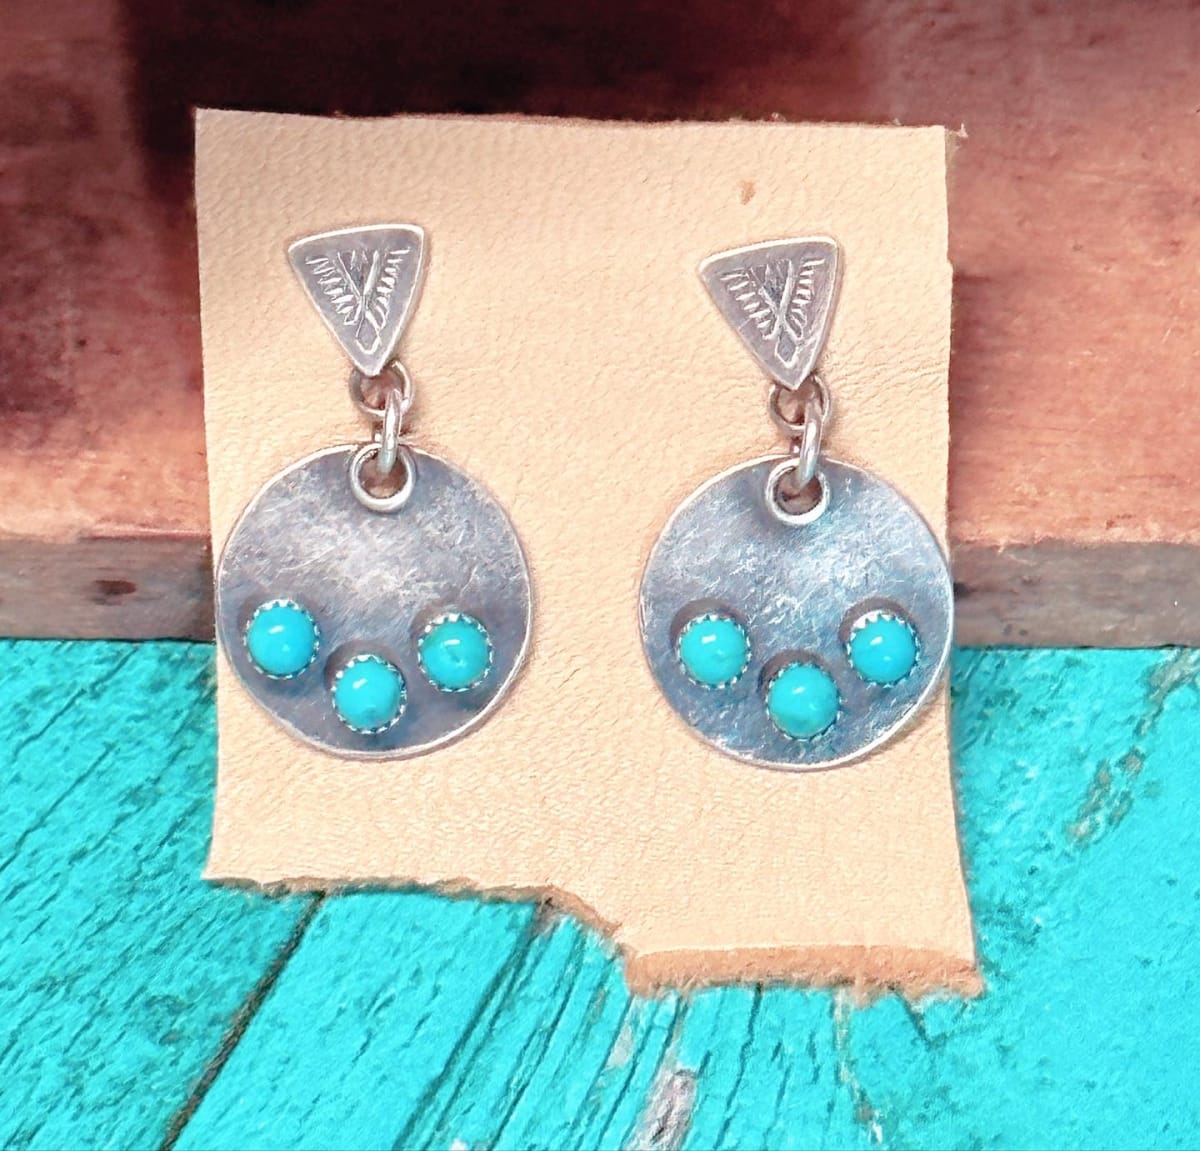 "Three Stone Stamped Luna Earrings" - Sterling Silver and Kingman Turquoise, Triangle Stamp Detail by Shasta Brooks  Image: All Art © Shasta Brooks Studio LLC